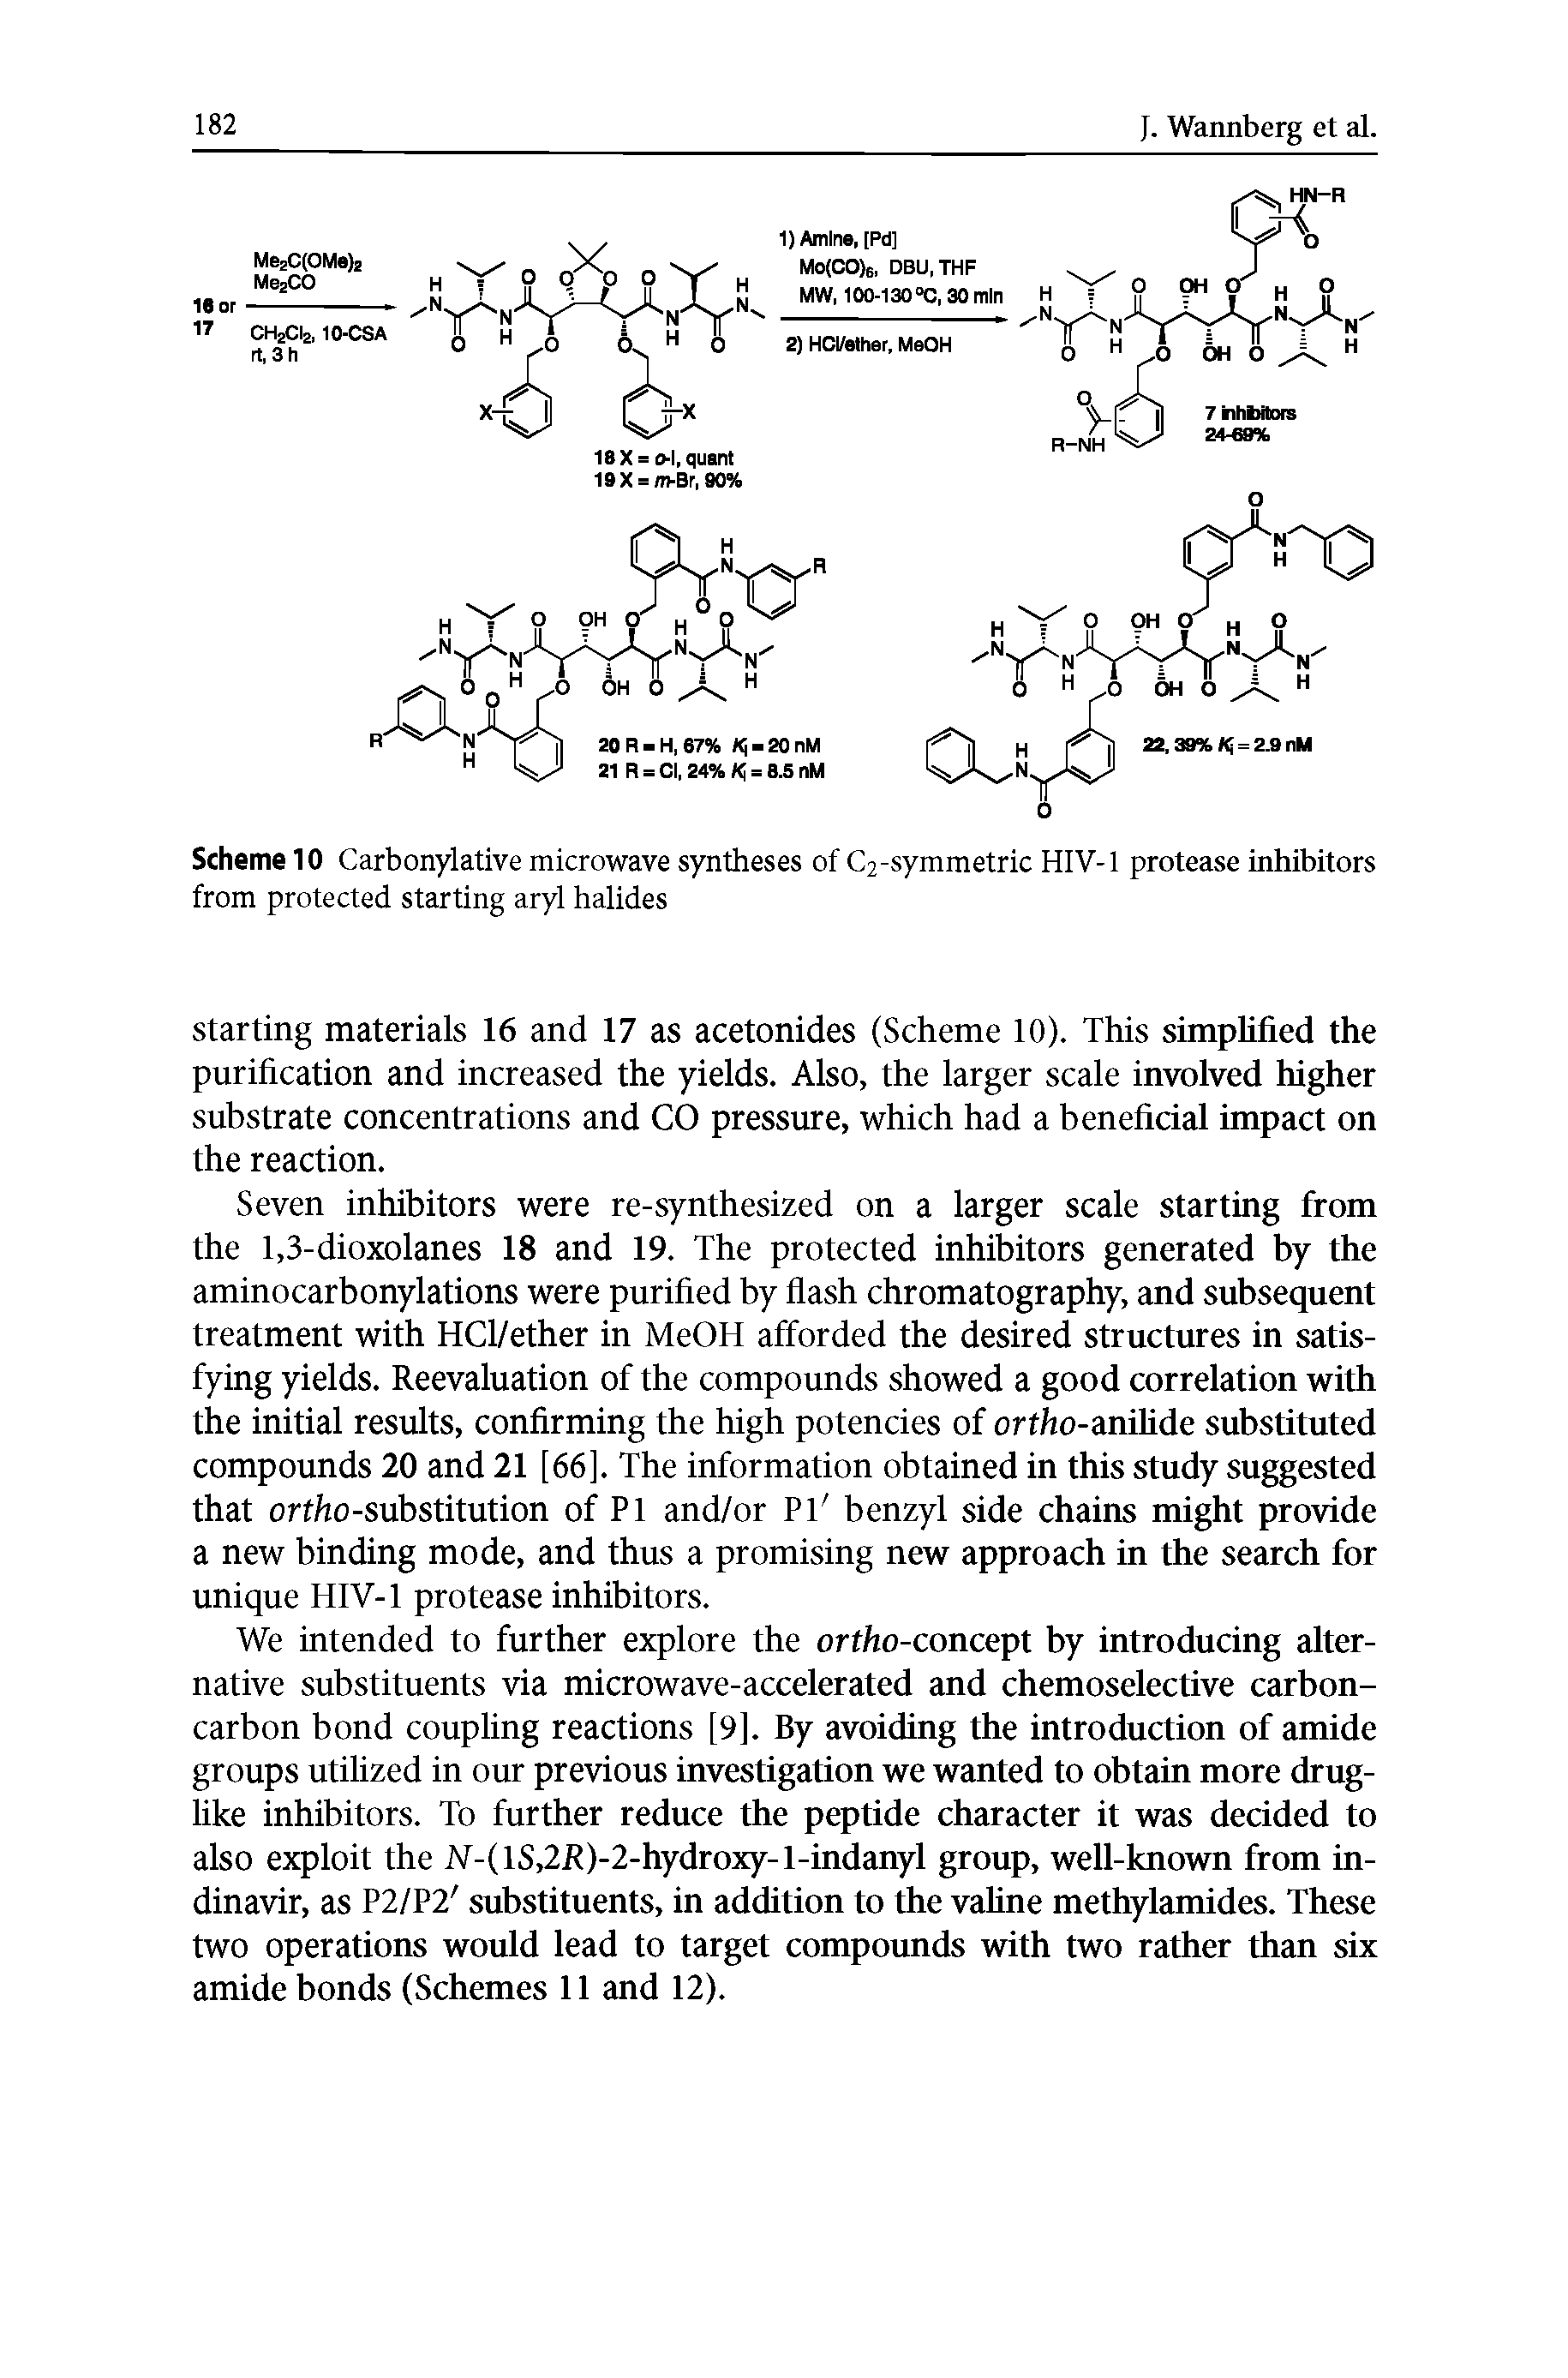 Scheme 10 Carbonylative microwave syntheses of C2-symmetric HIV-1 protease inhibitors from protected starting aryl halides...